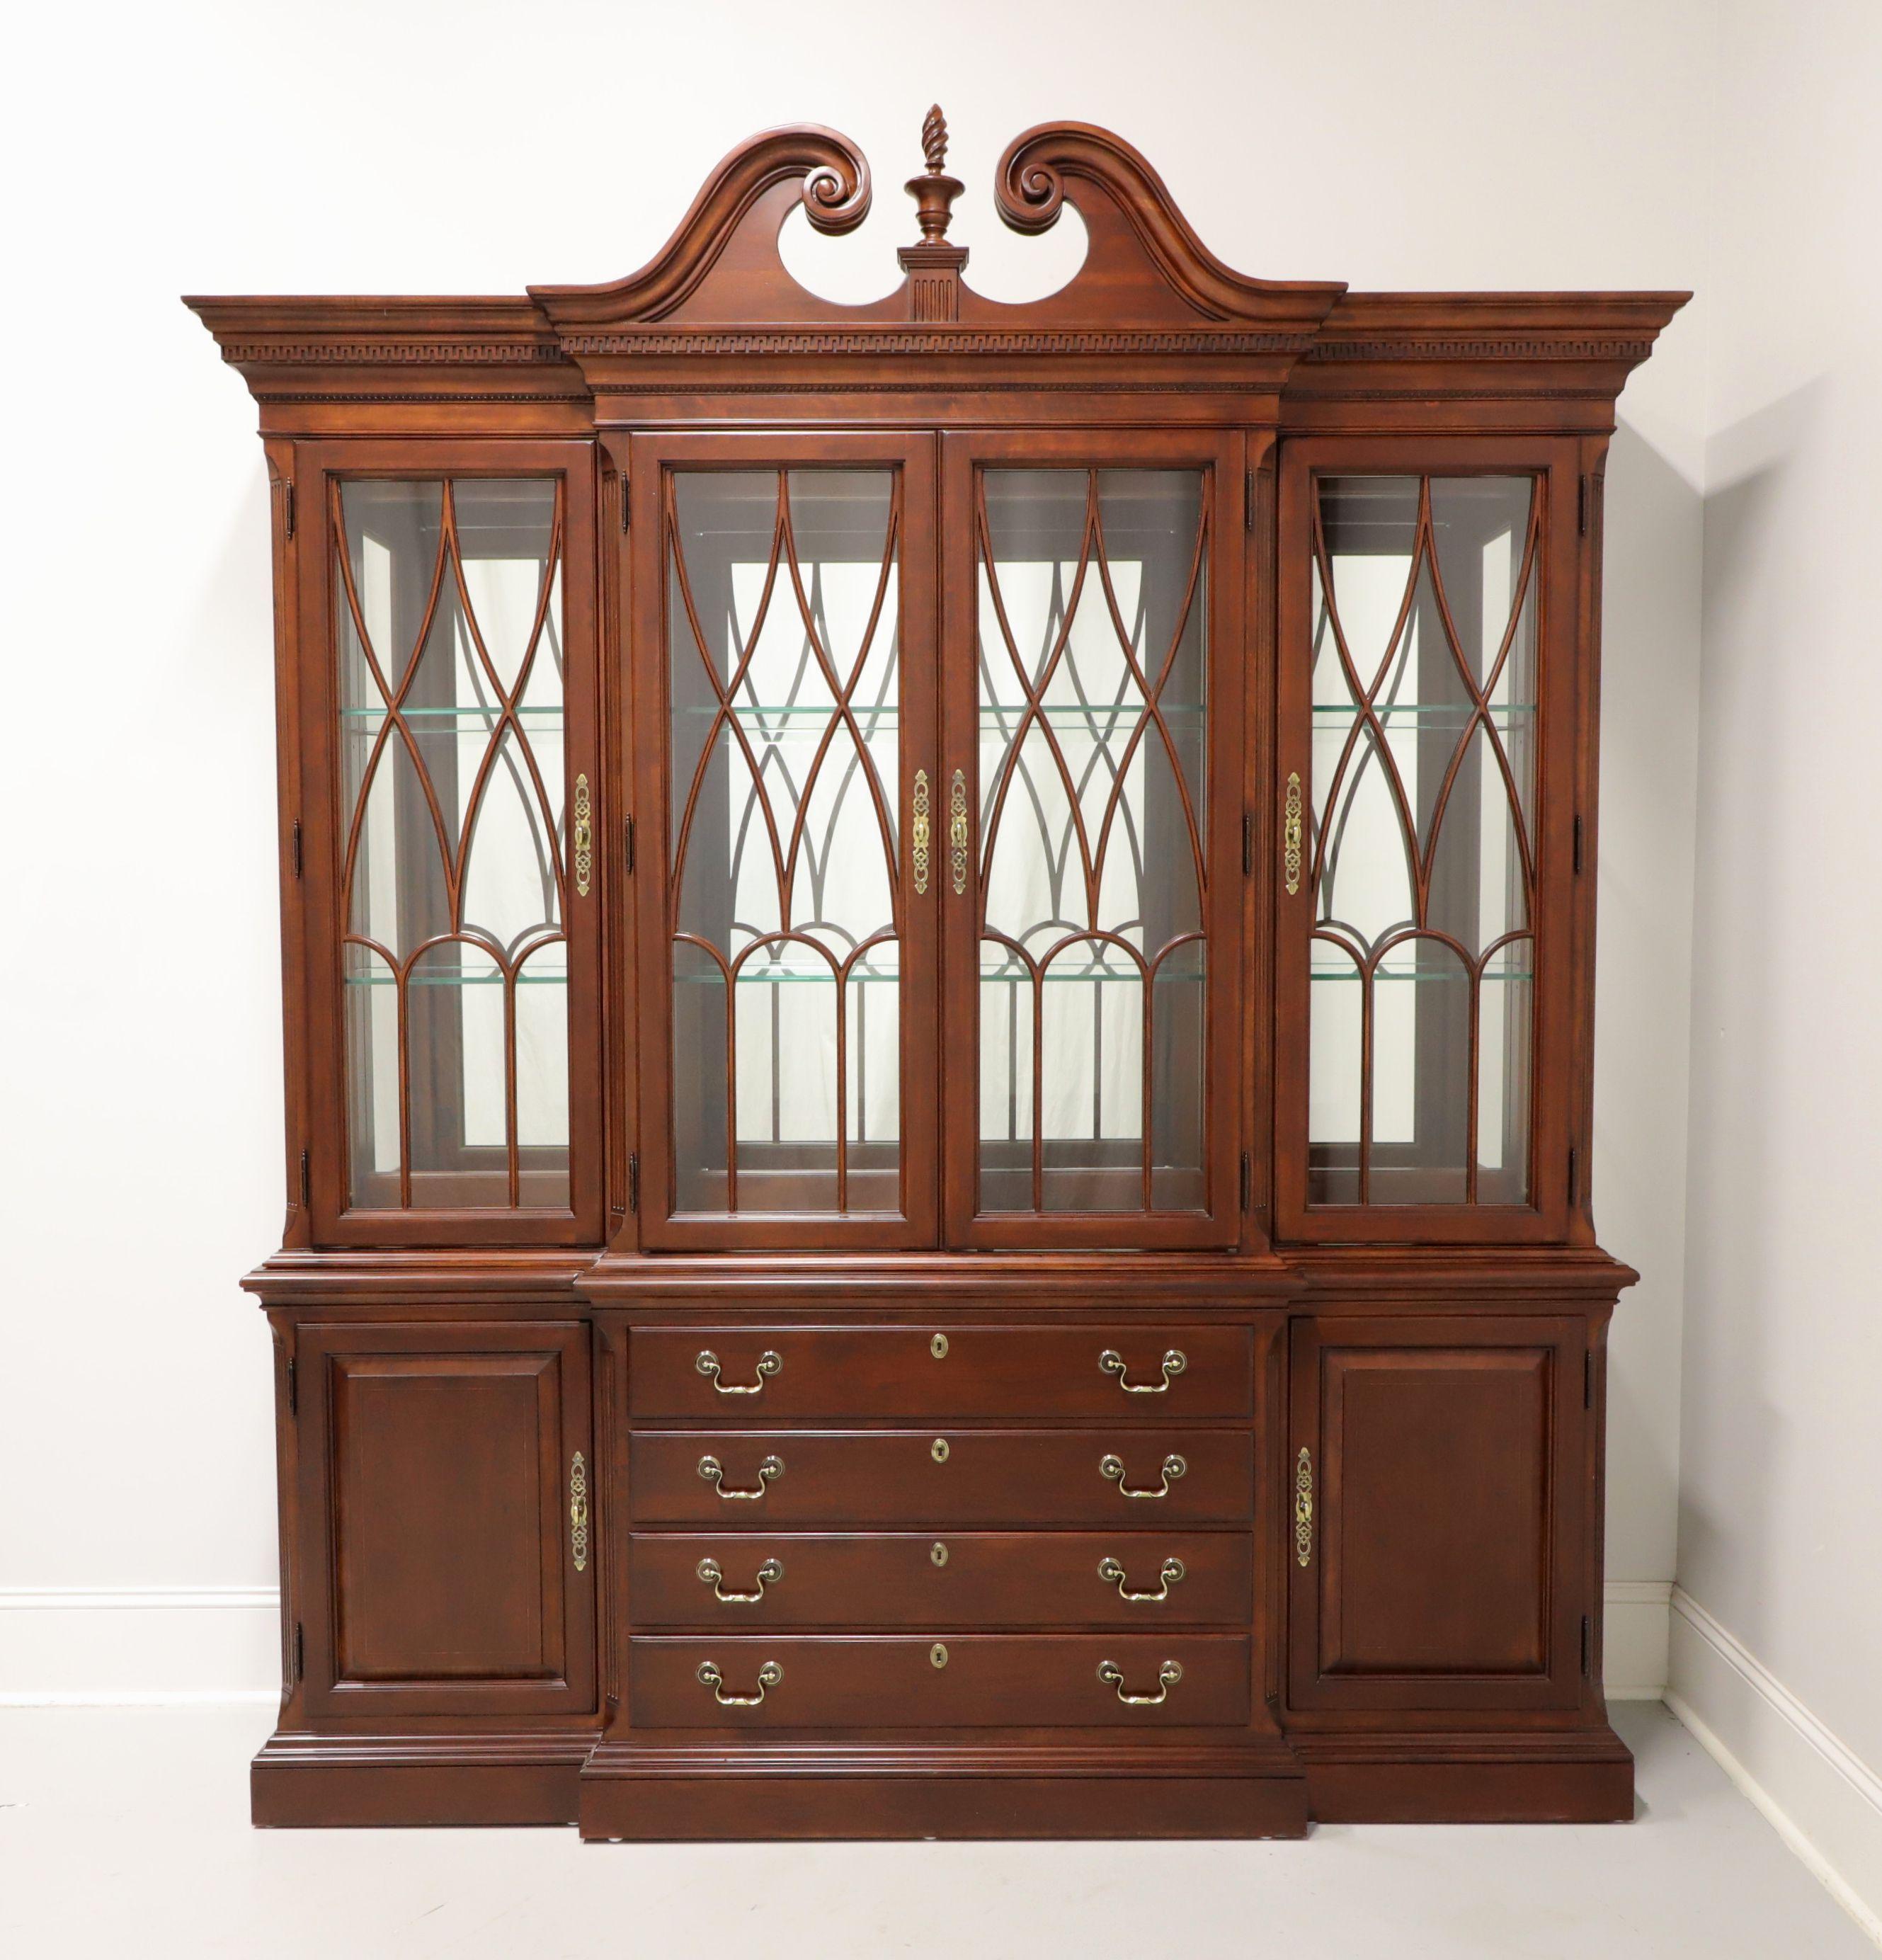 PENNSYLVANIA HOUSE Cerry Traditional Breakfront China Cabinet 9